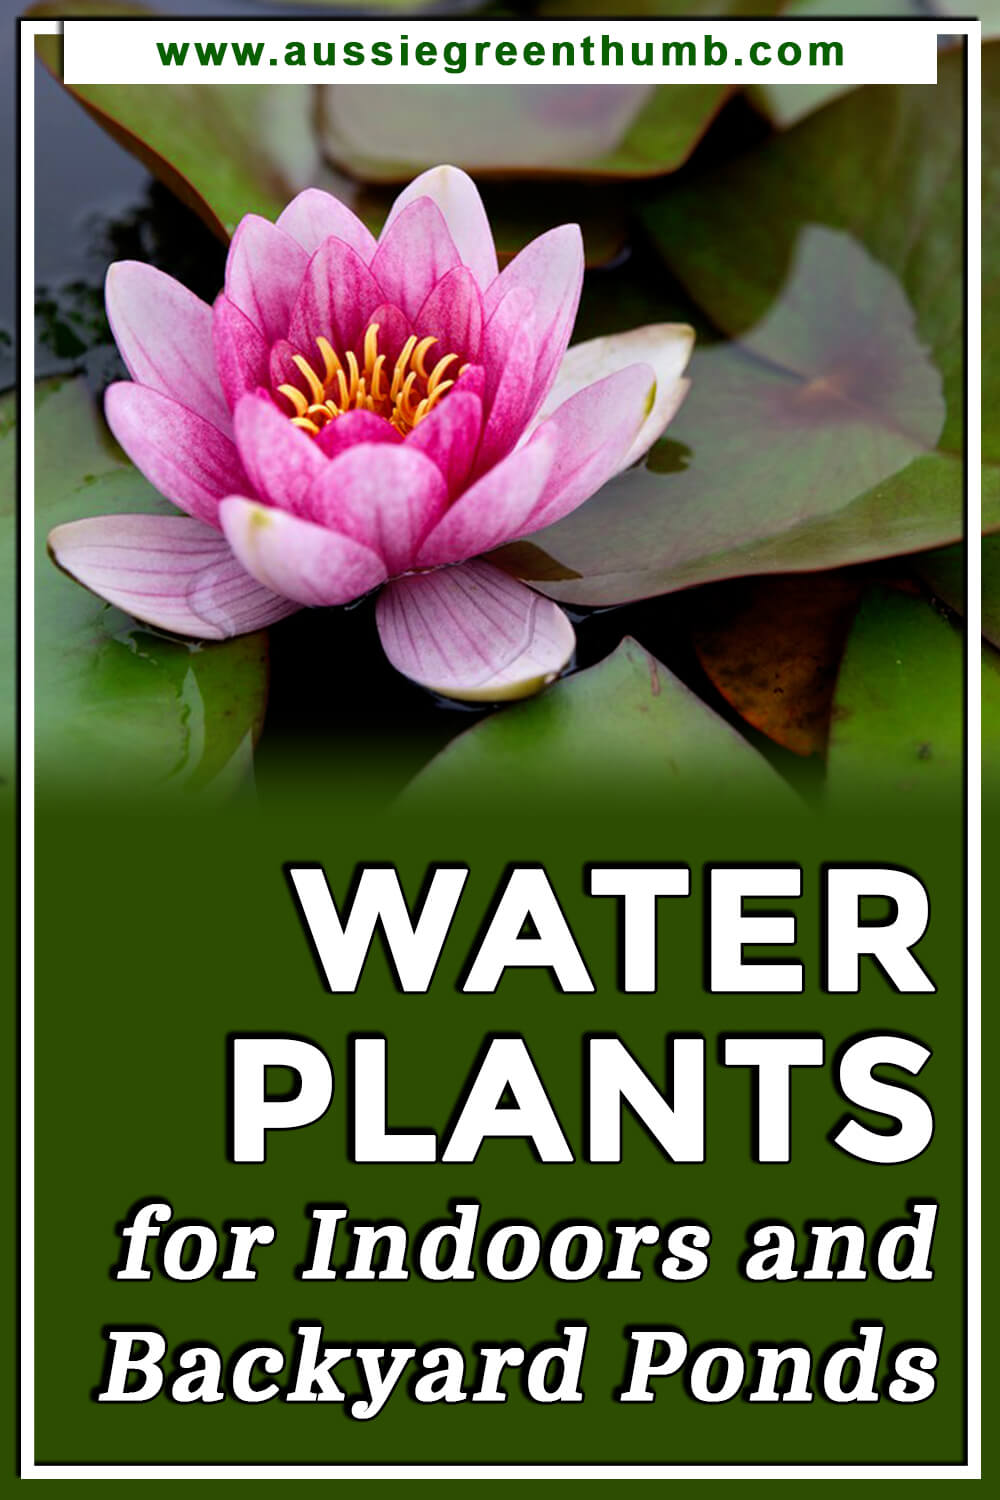 Best Water Plants for Indoors and Backyard Ponds